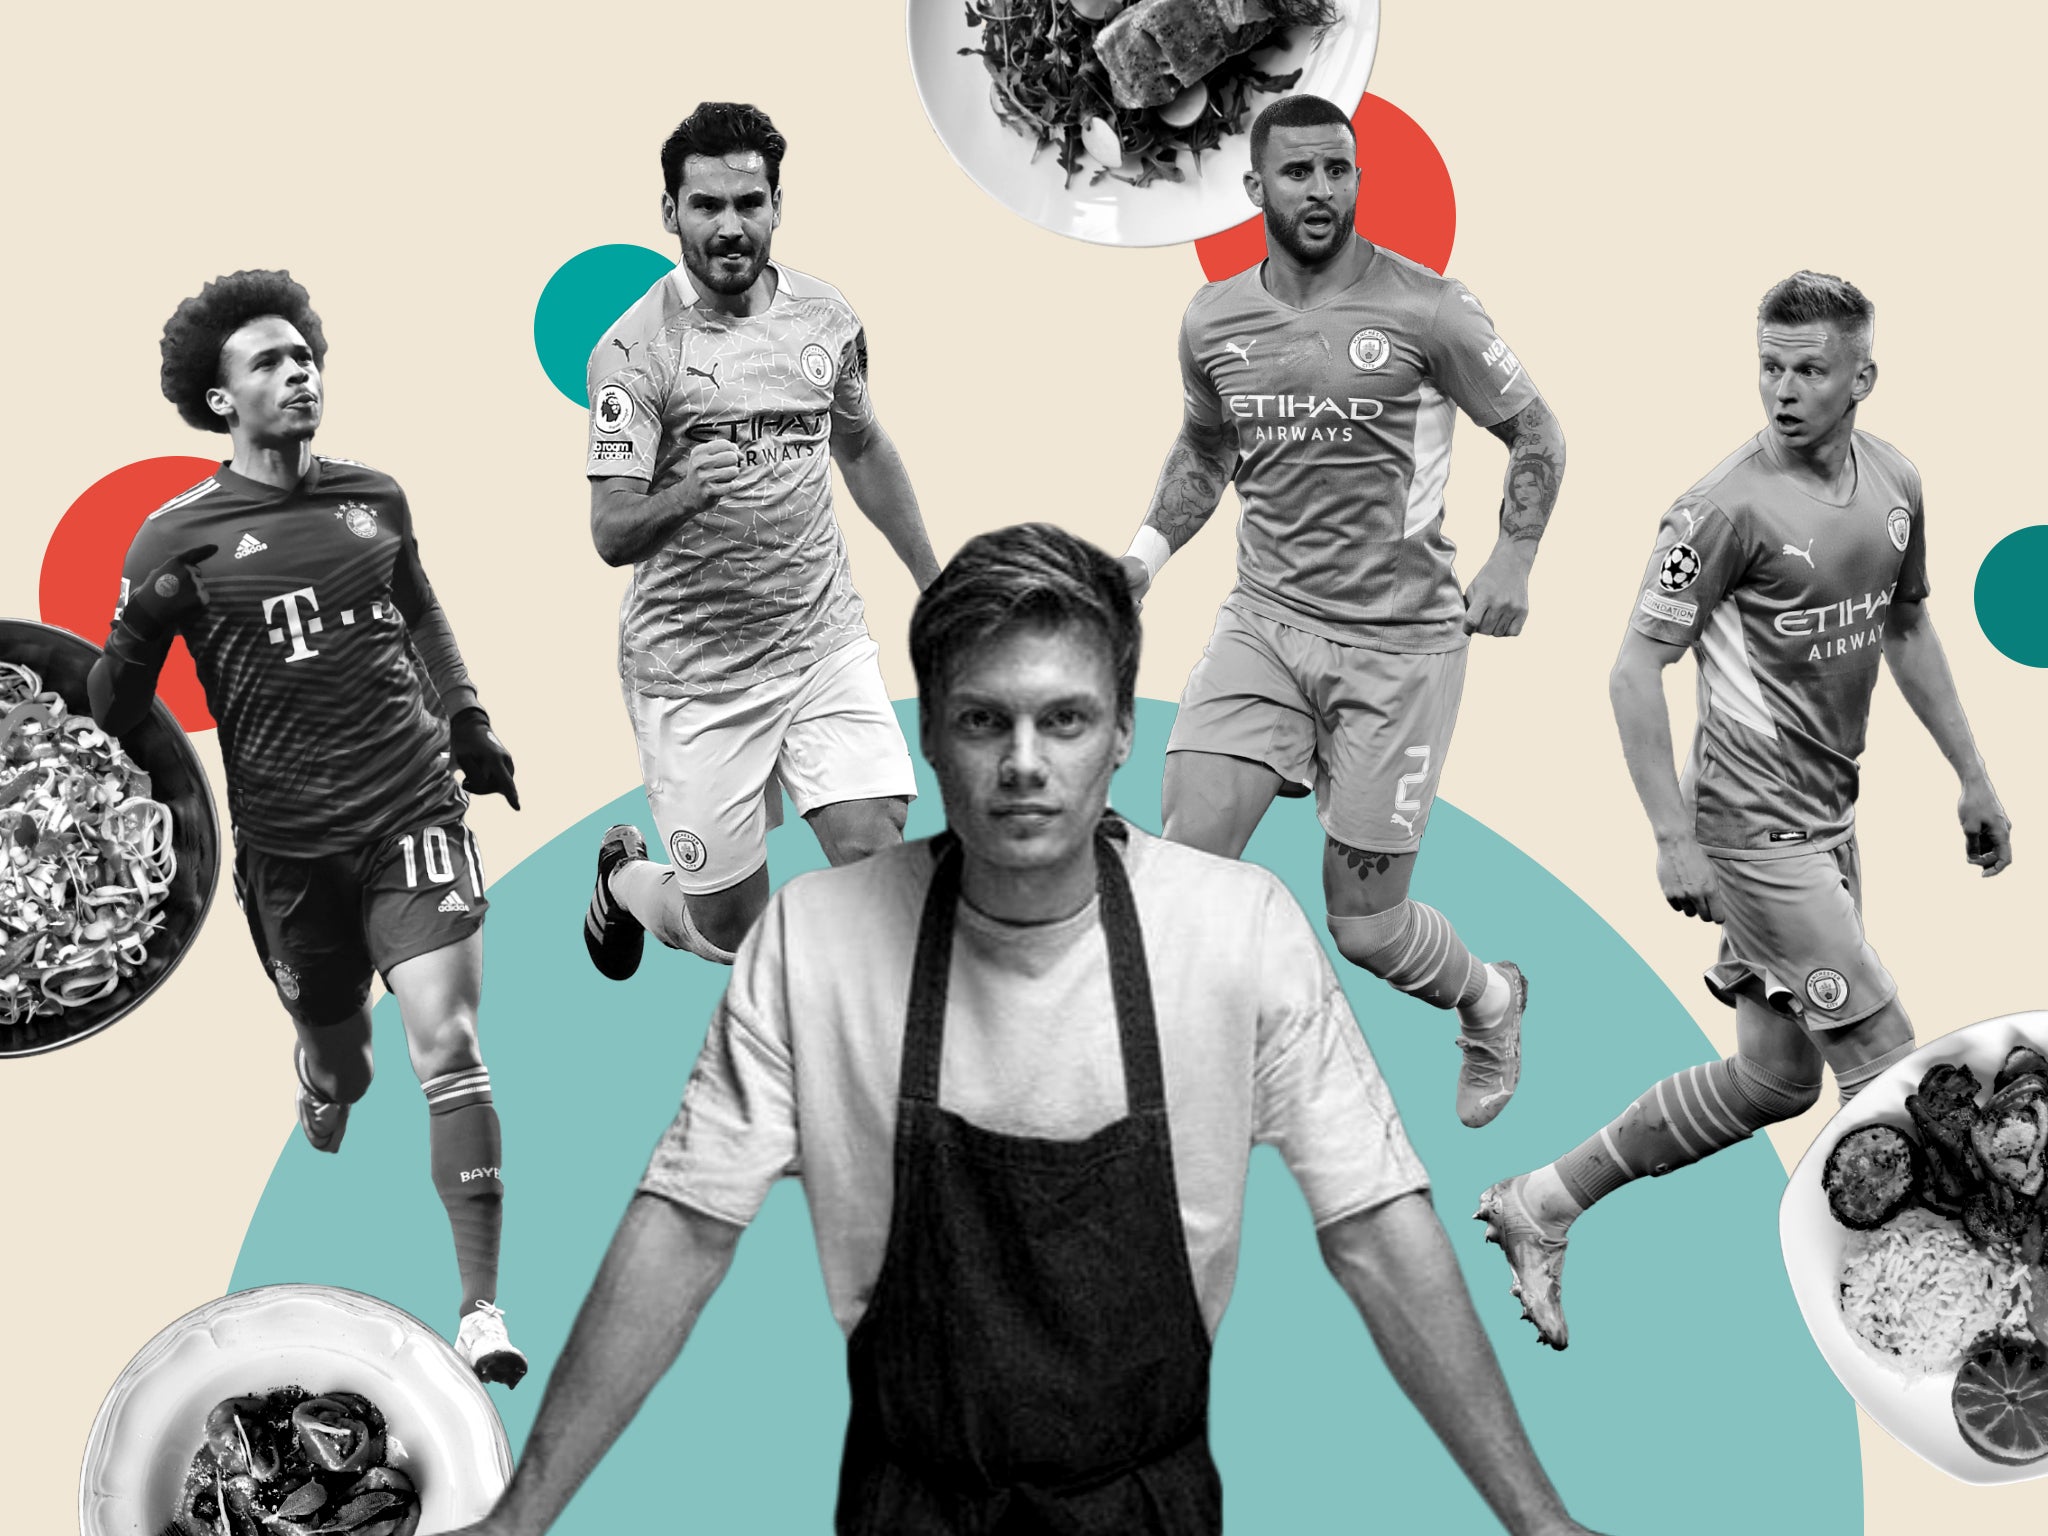 Jonny Marsh has become the go-to chef for top Premier League talents